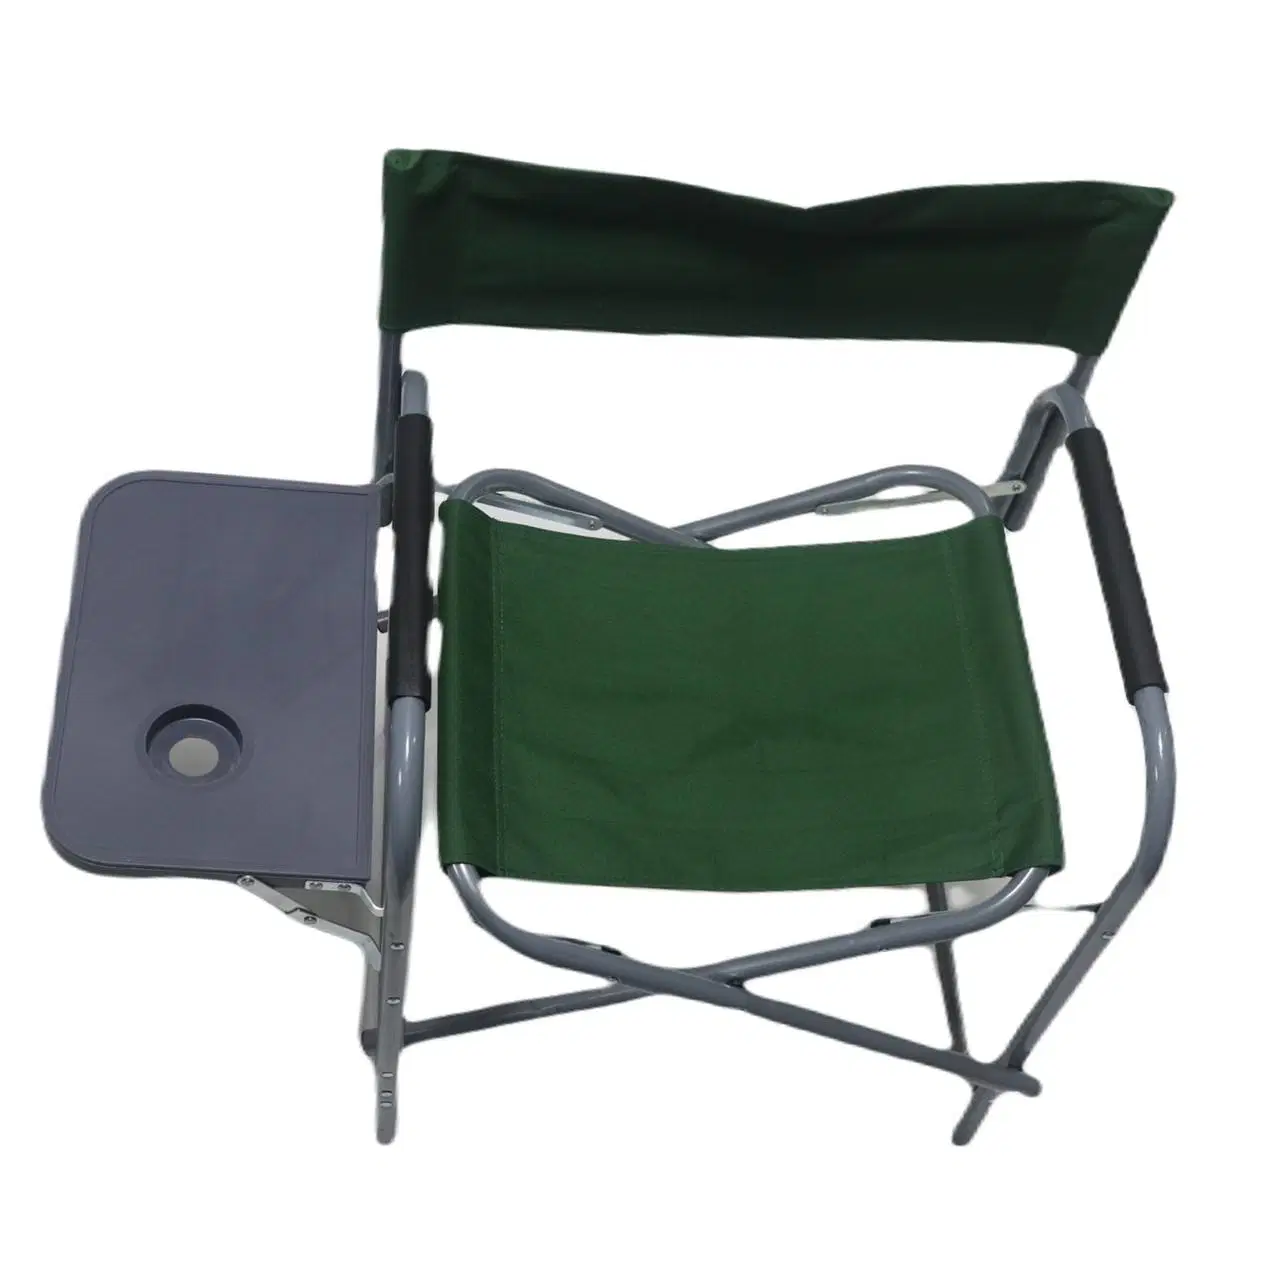 Camping Hiking Heavy Ducy Carp Fishing Chairs, Portable Outdoor Steel Folding Camping Director Chairs with Side Table